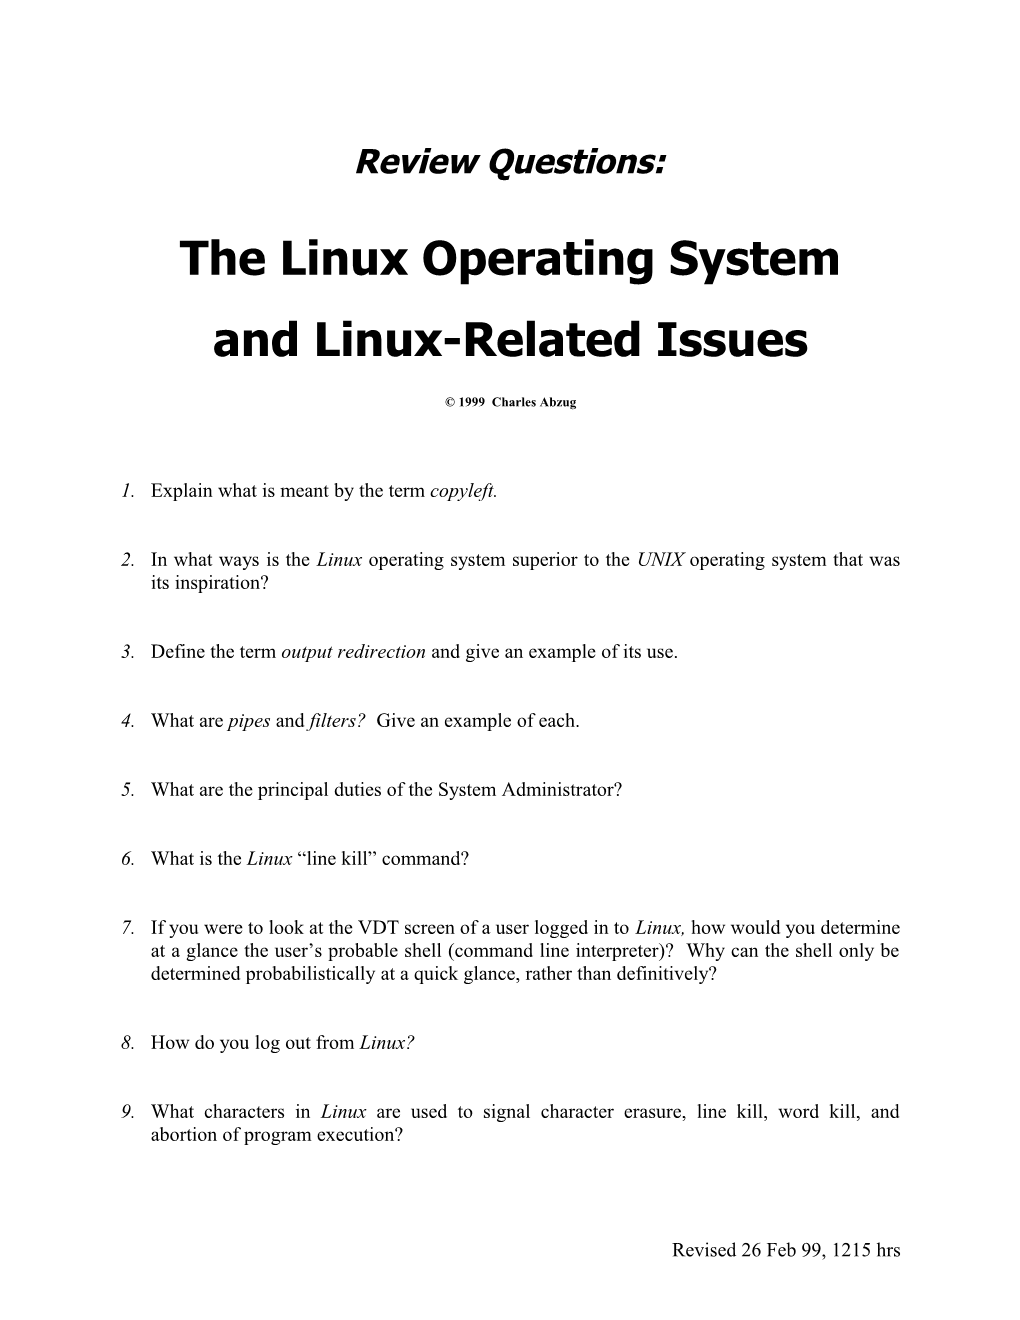 Review Questions: Linux Operating System and Linux-Related Issues